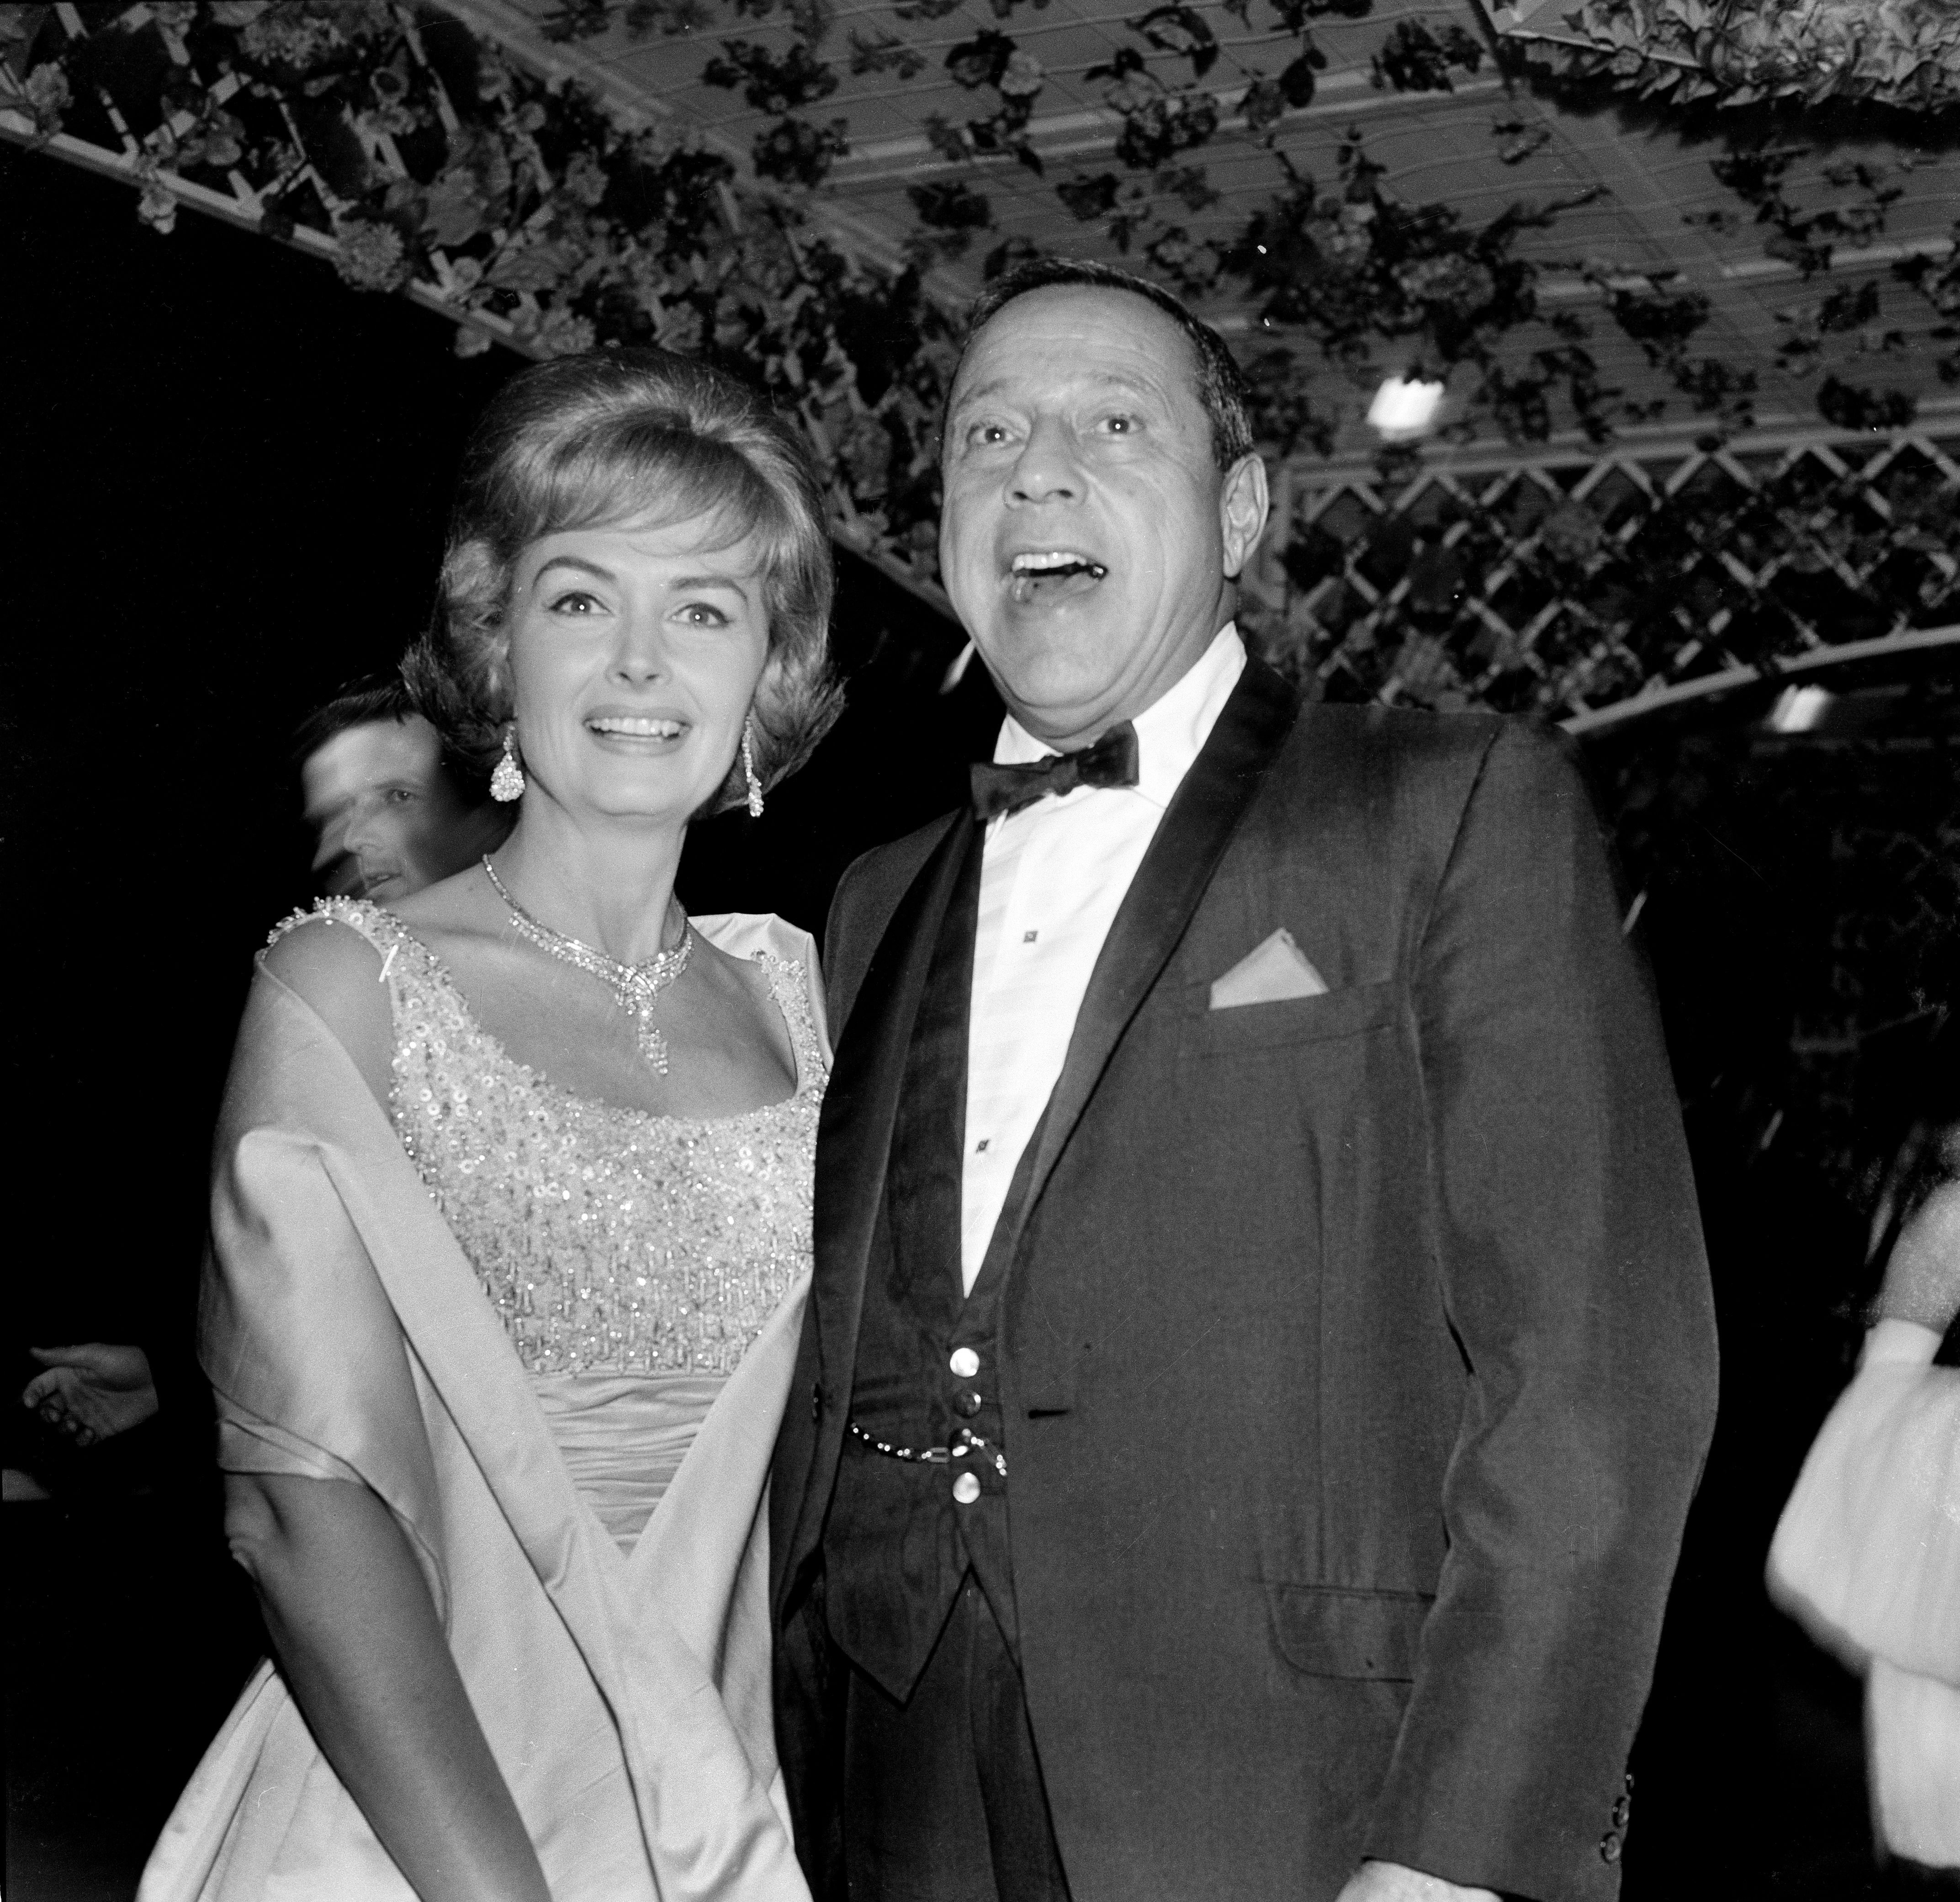 Donna Reed and her husband Tony Owen at an event in Los Angeles, California, circa 1962 | Photo: Earl Leaf/Michael Ochs Archives/Getty Images